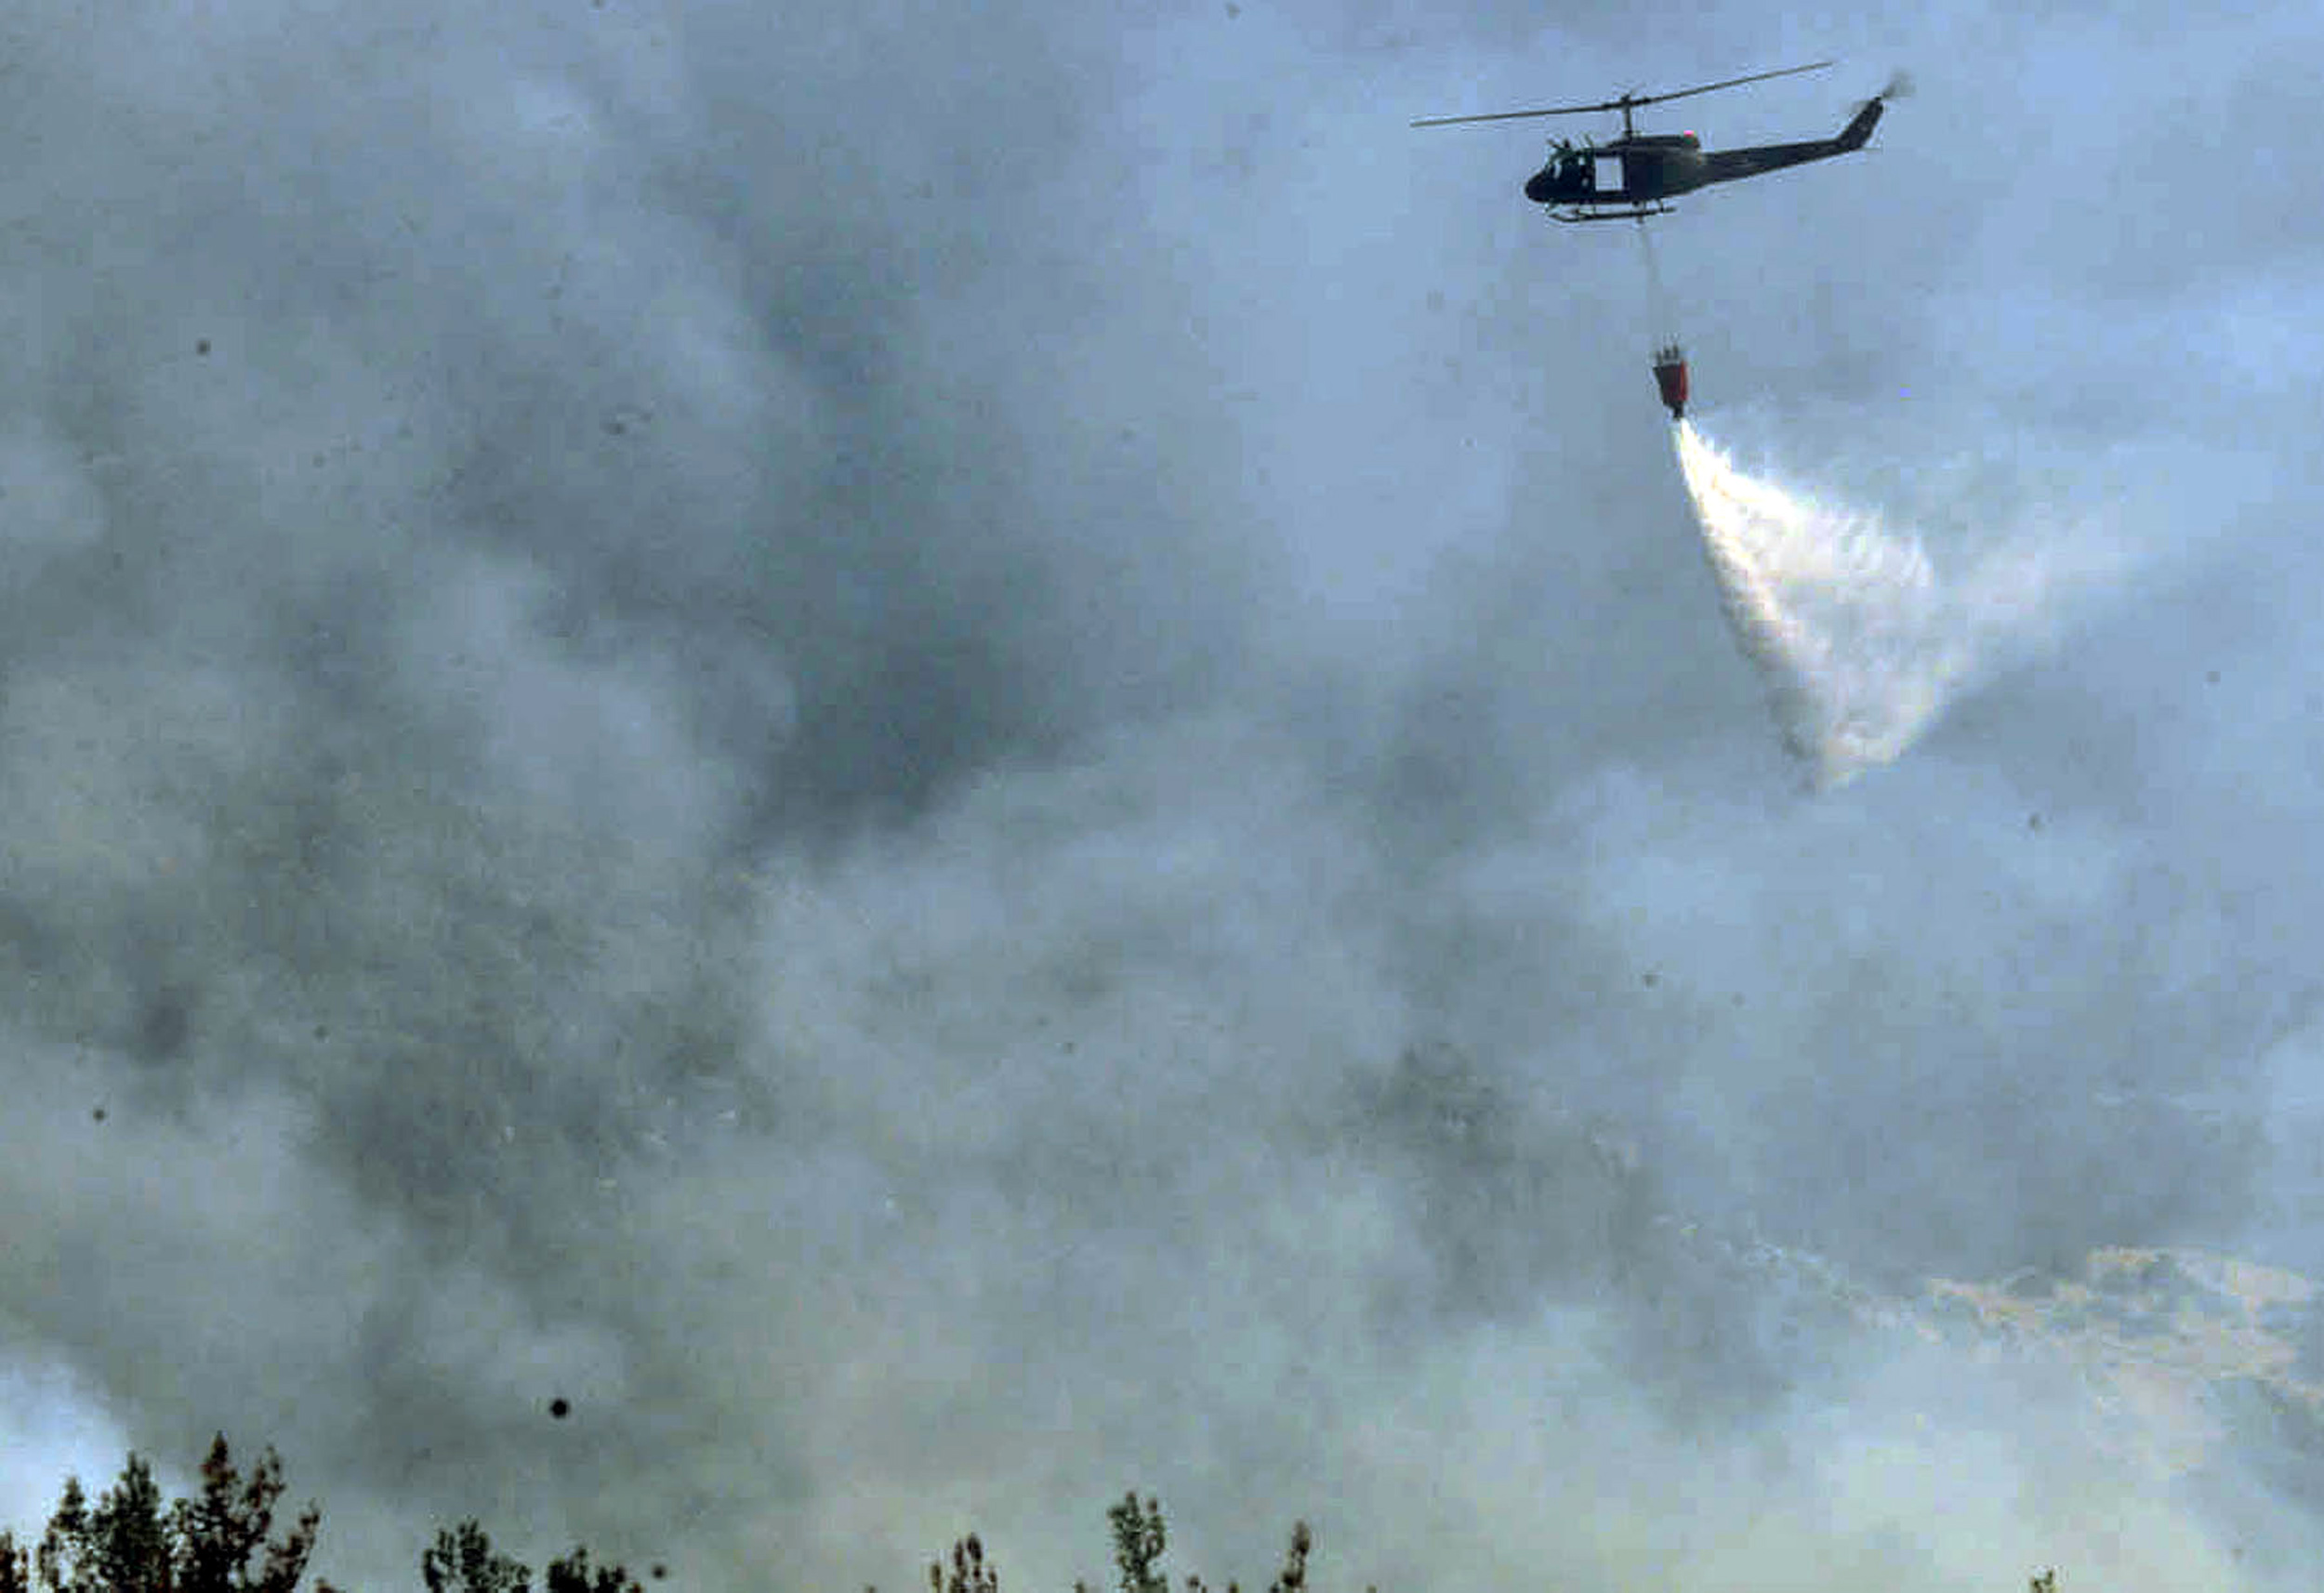 Lebanese army Airplane help in putting out fires in Lebanon forests